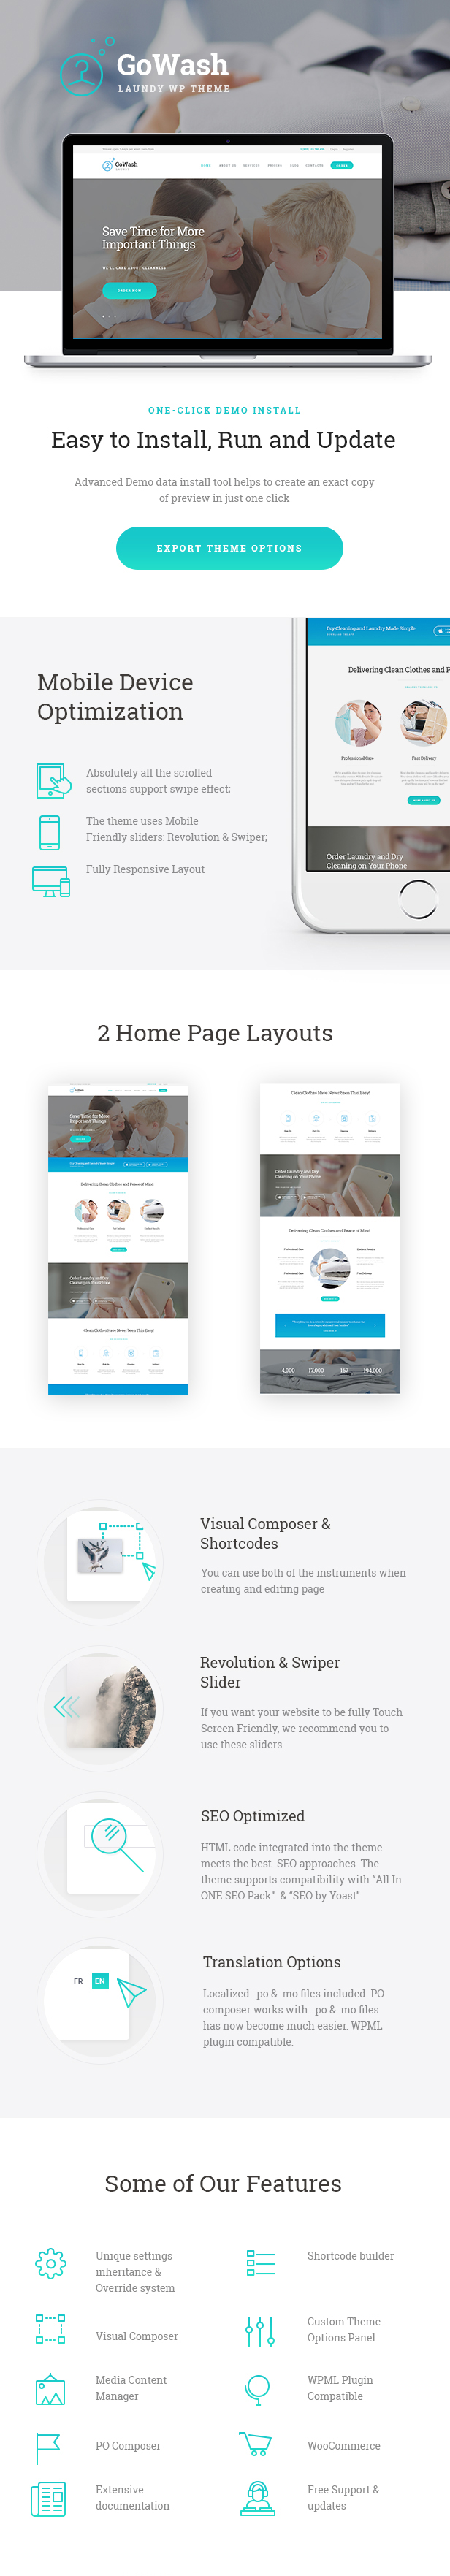 Dry Cleaning & Laundry Service WordPress Theme features